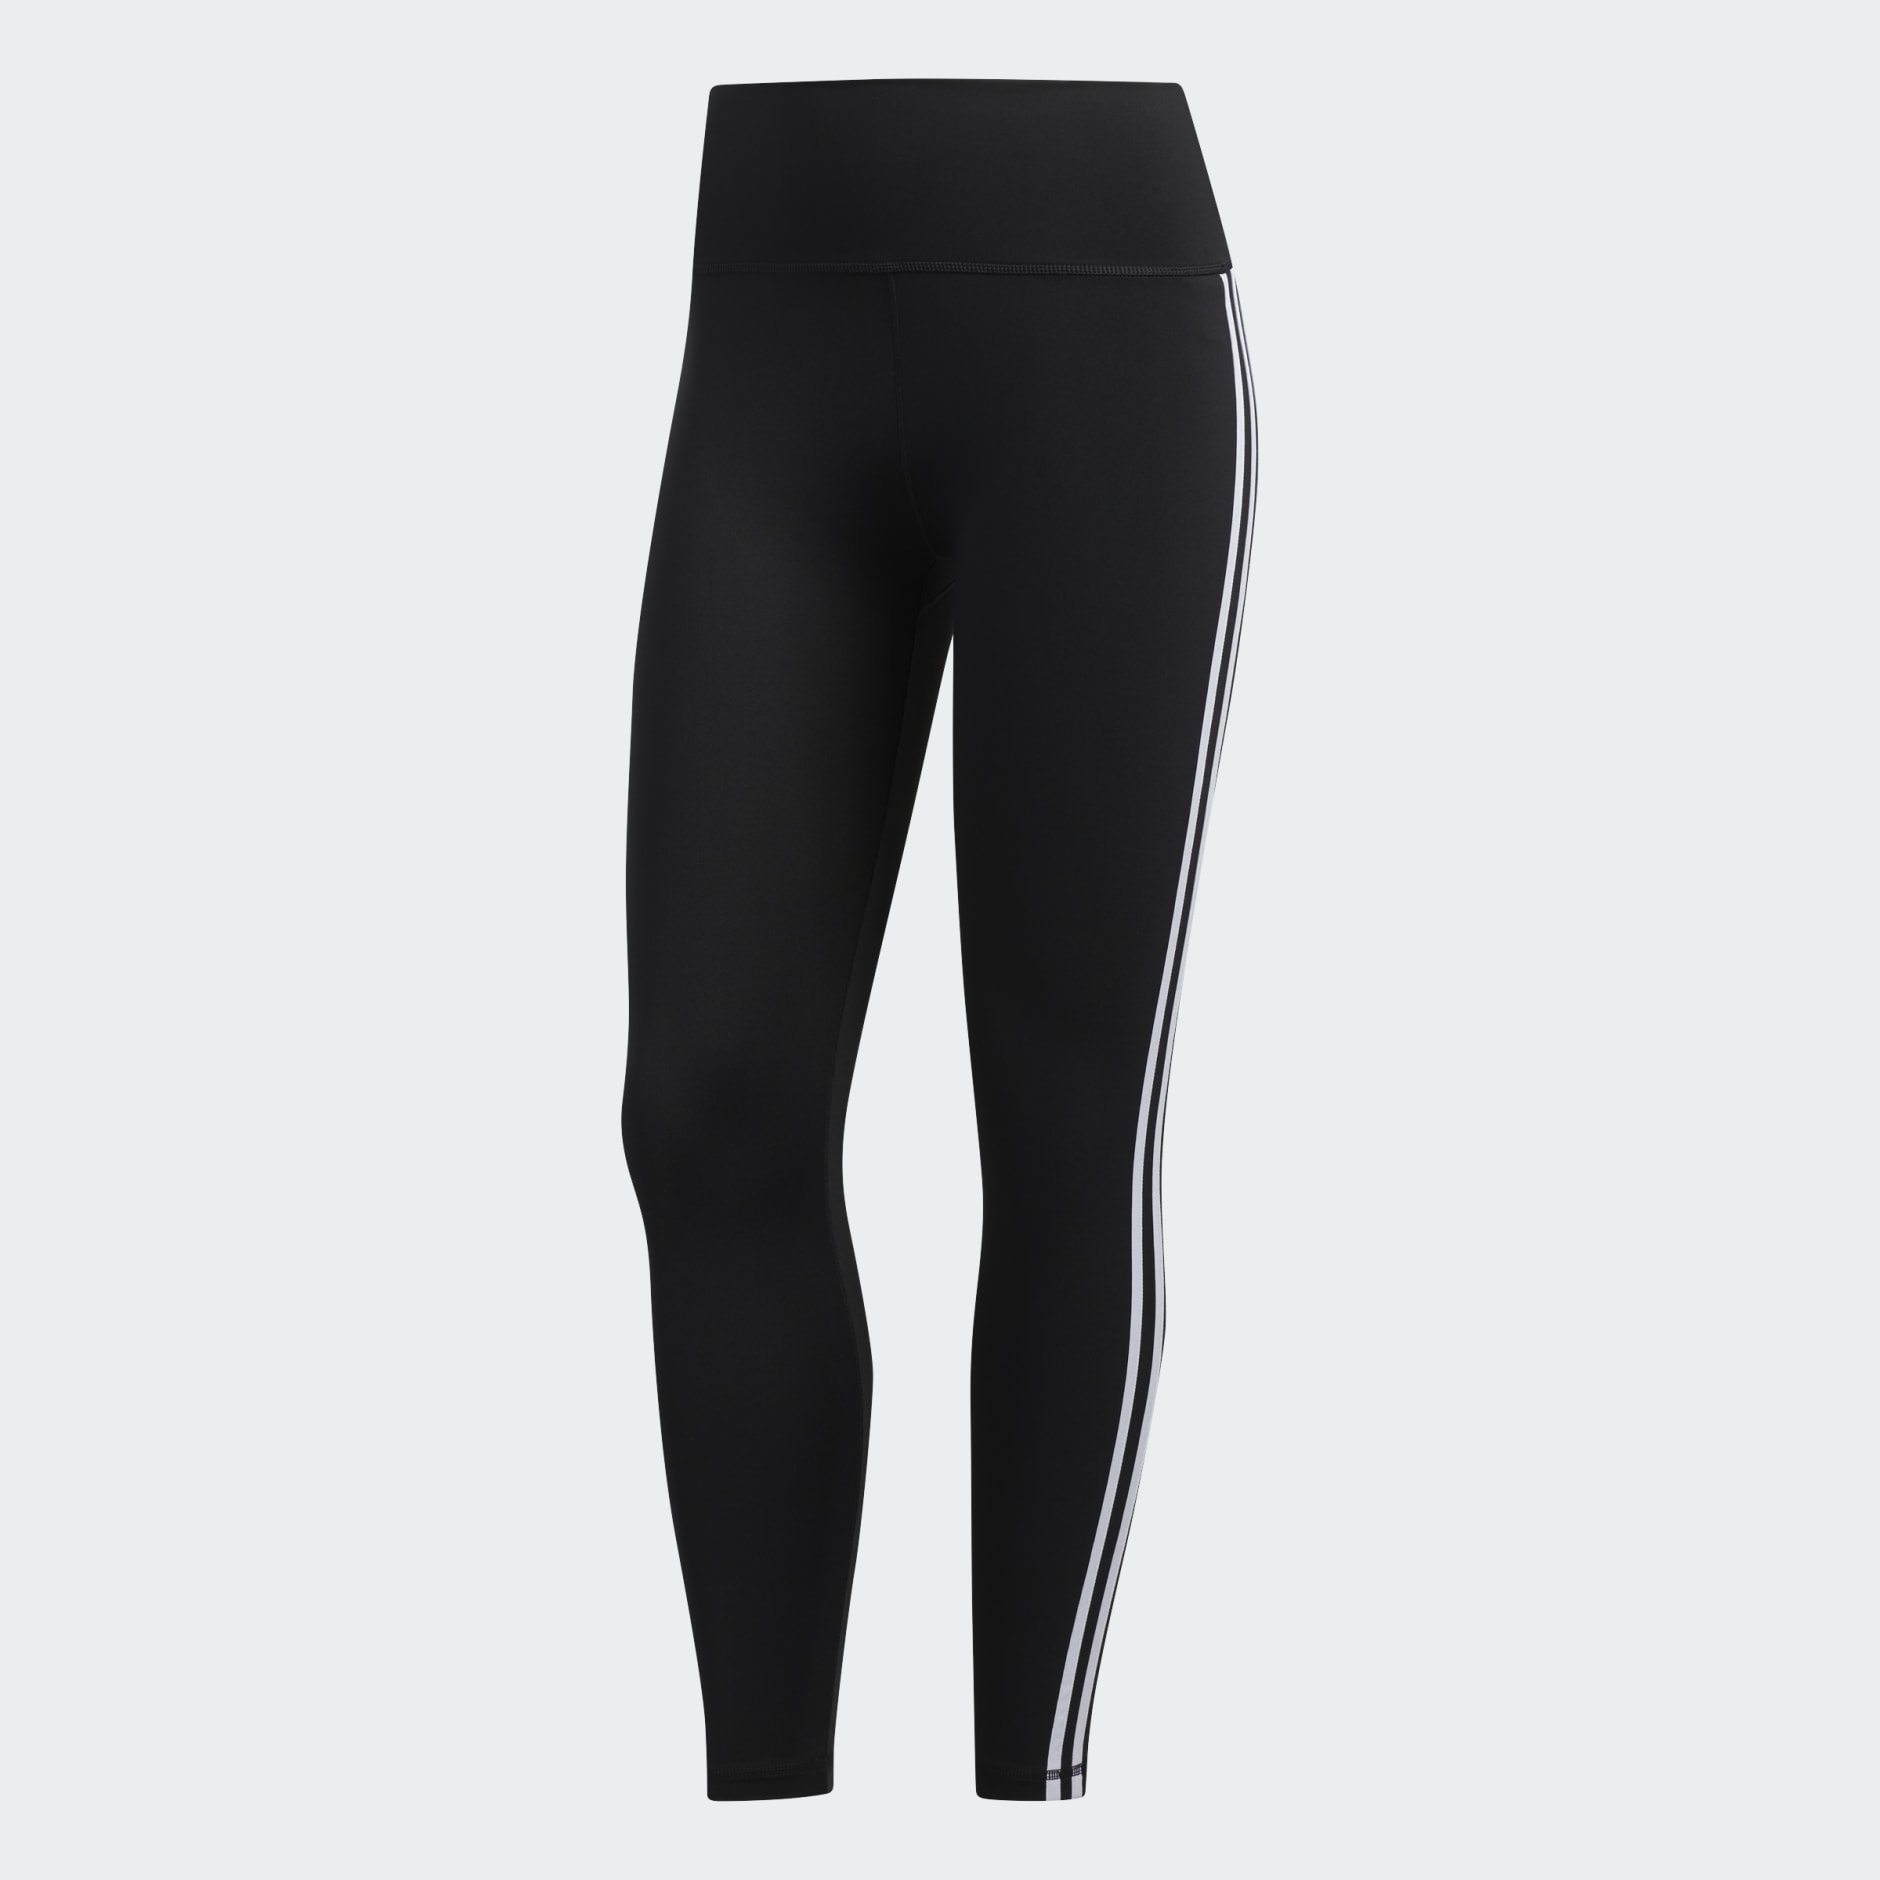 Intens Opschudding het ergste Women's Clothing - Believe This 2.0 3-Stripes 7/8 Tights - Black | adidas  Kuwait